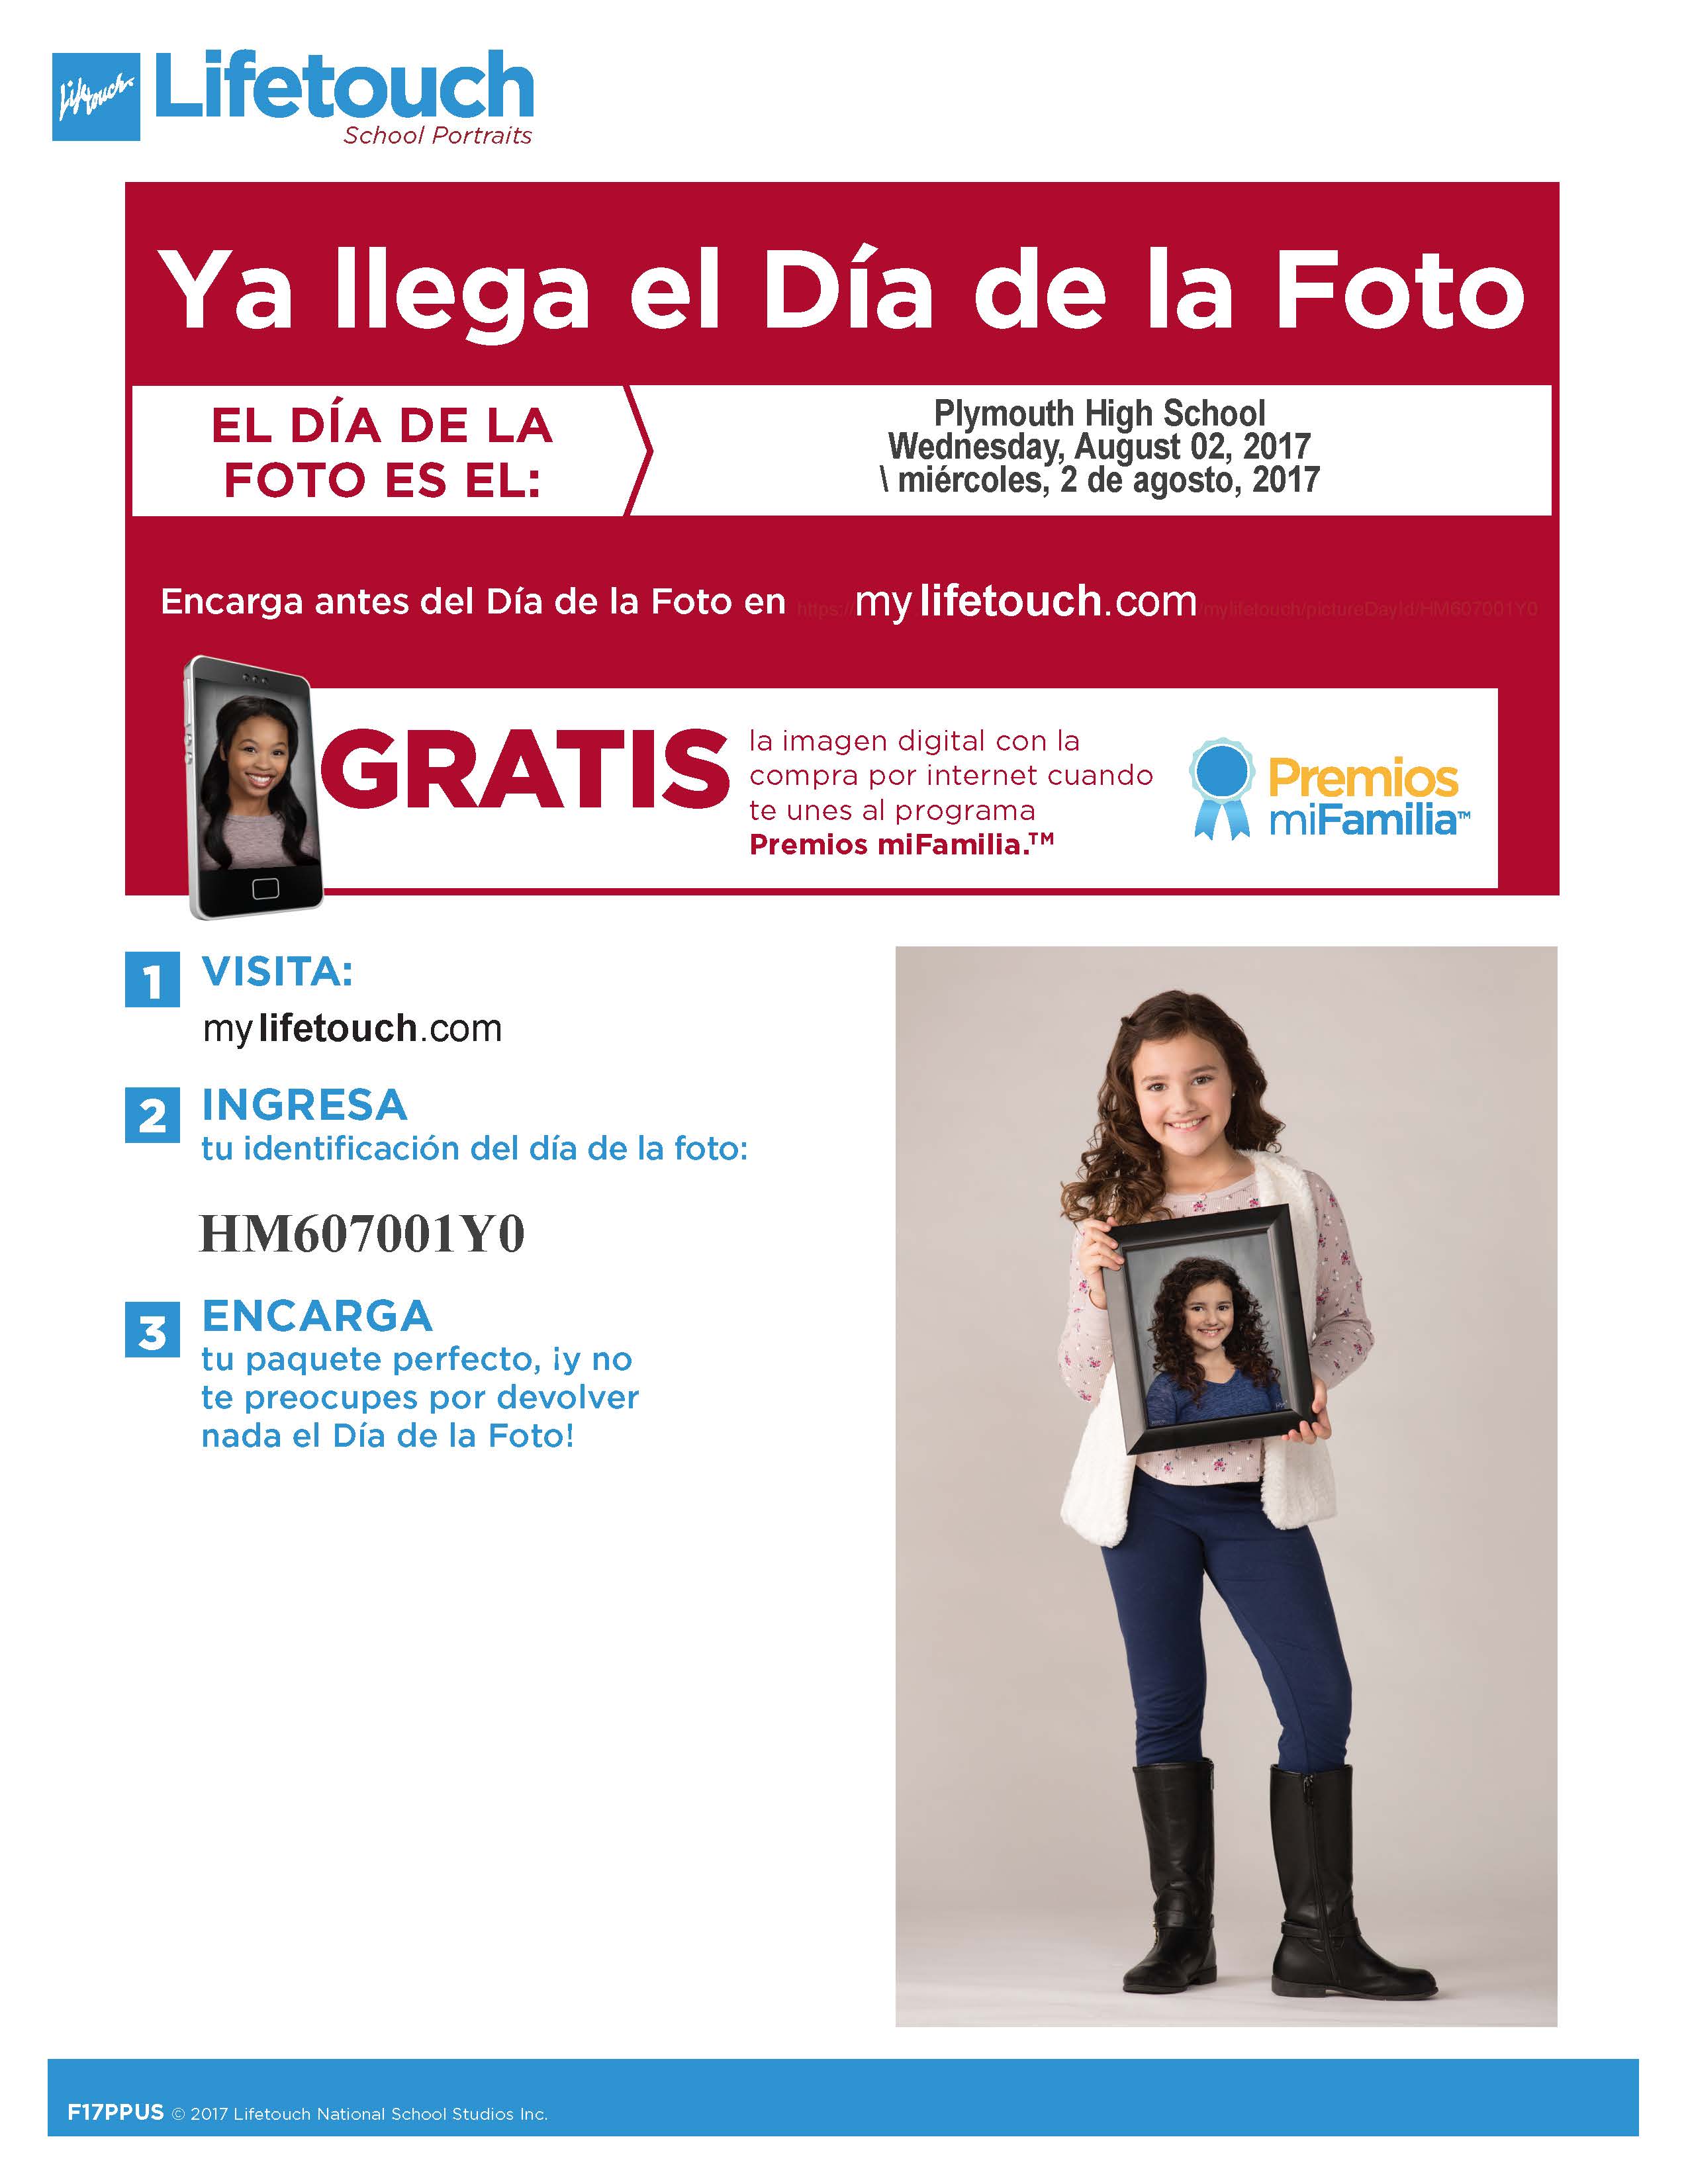 Lifetouch online order form in Spanish